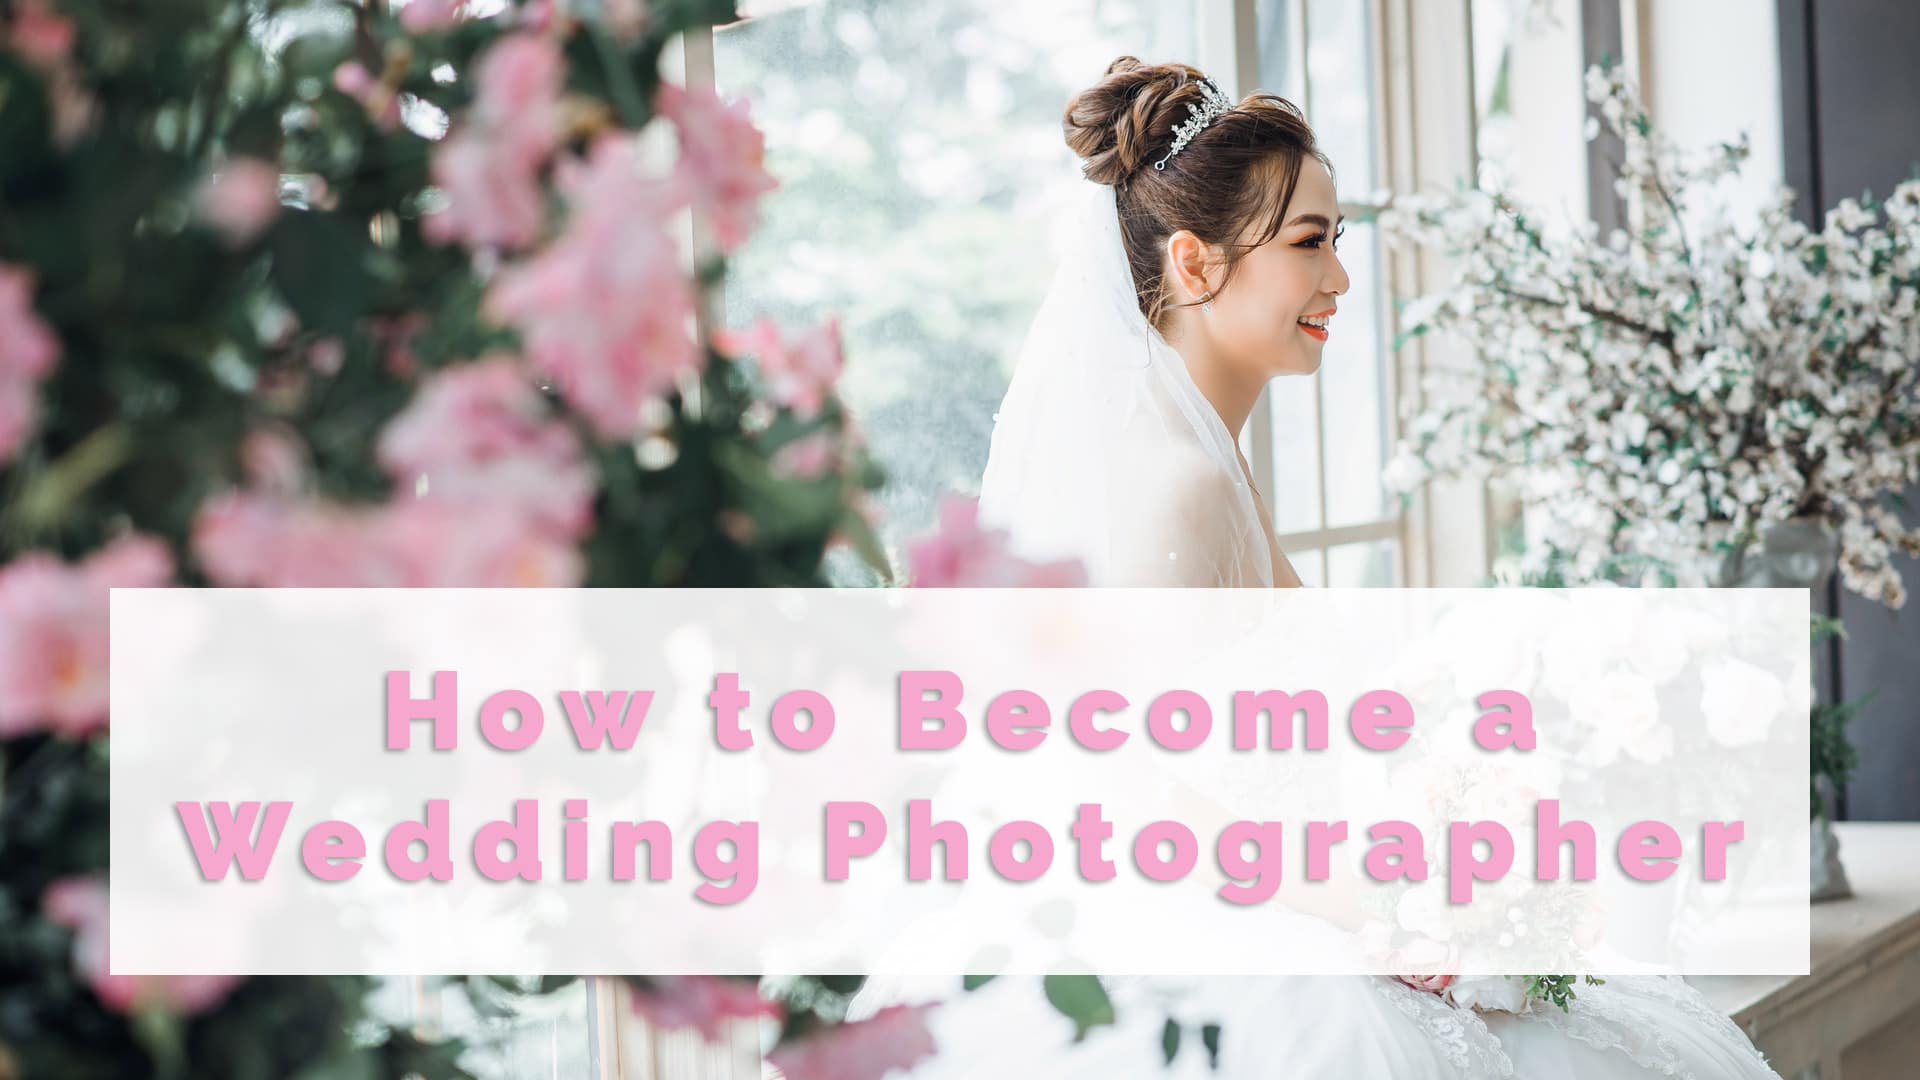 How to Become a Wedding Photographer in 5 Steps